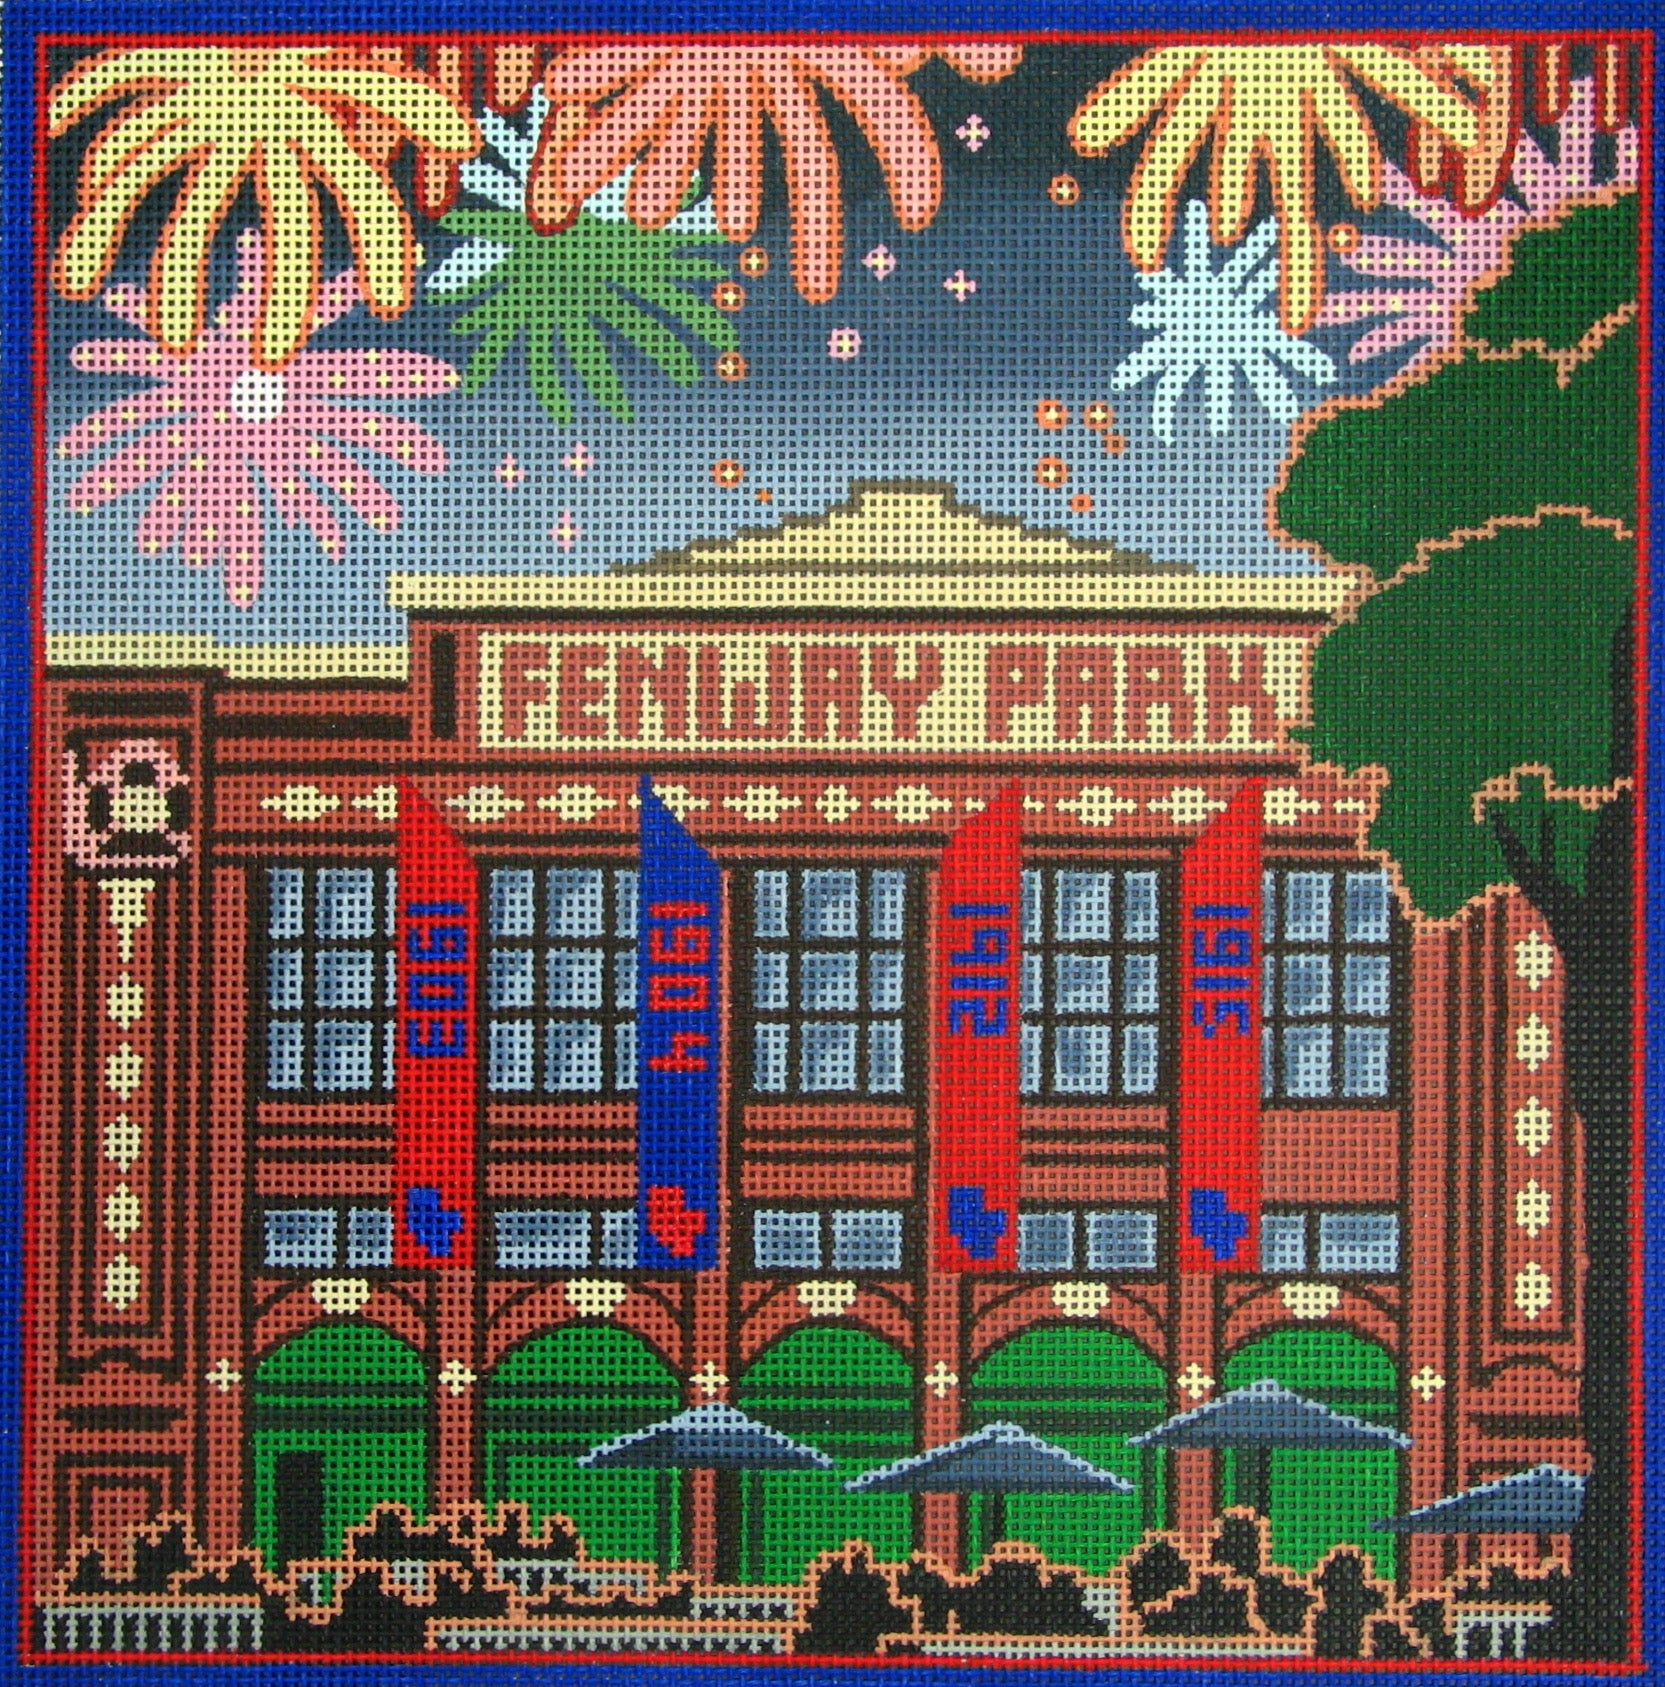 Amanda Lawford needlepoint canvas of the Fenway Park baseball stadium, home of the Boston Red Sox MLB team - complete with World Series banners and fireworks